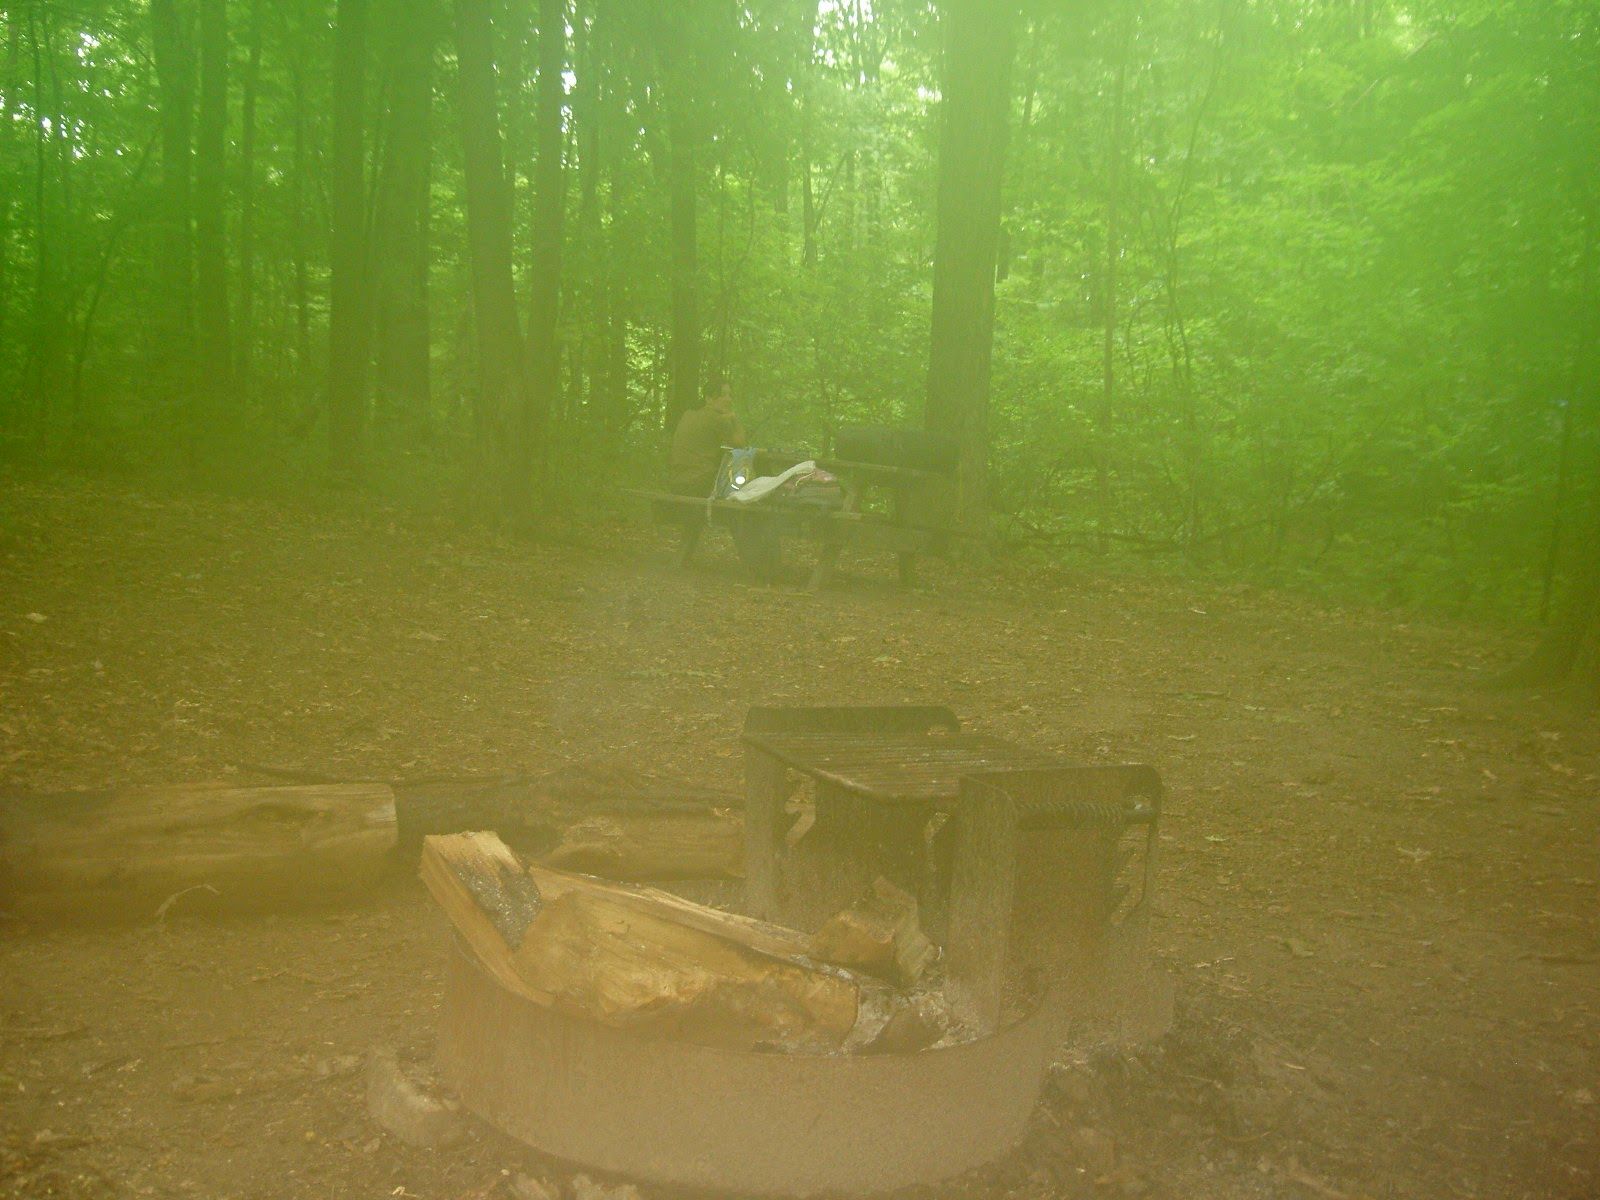 A misty picture of a campground and picnic table.